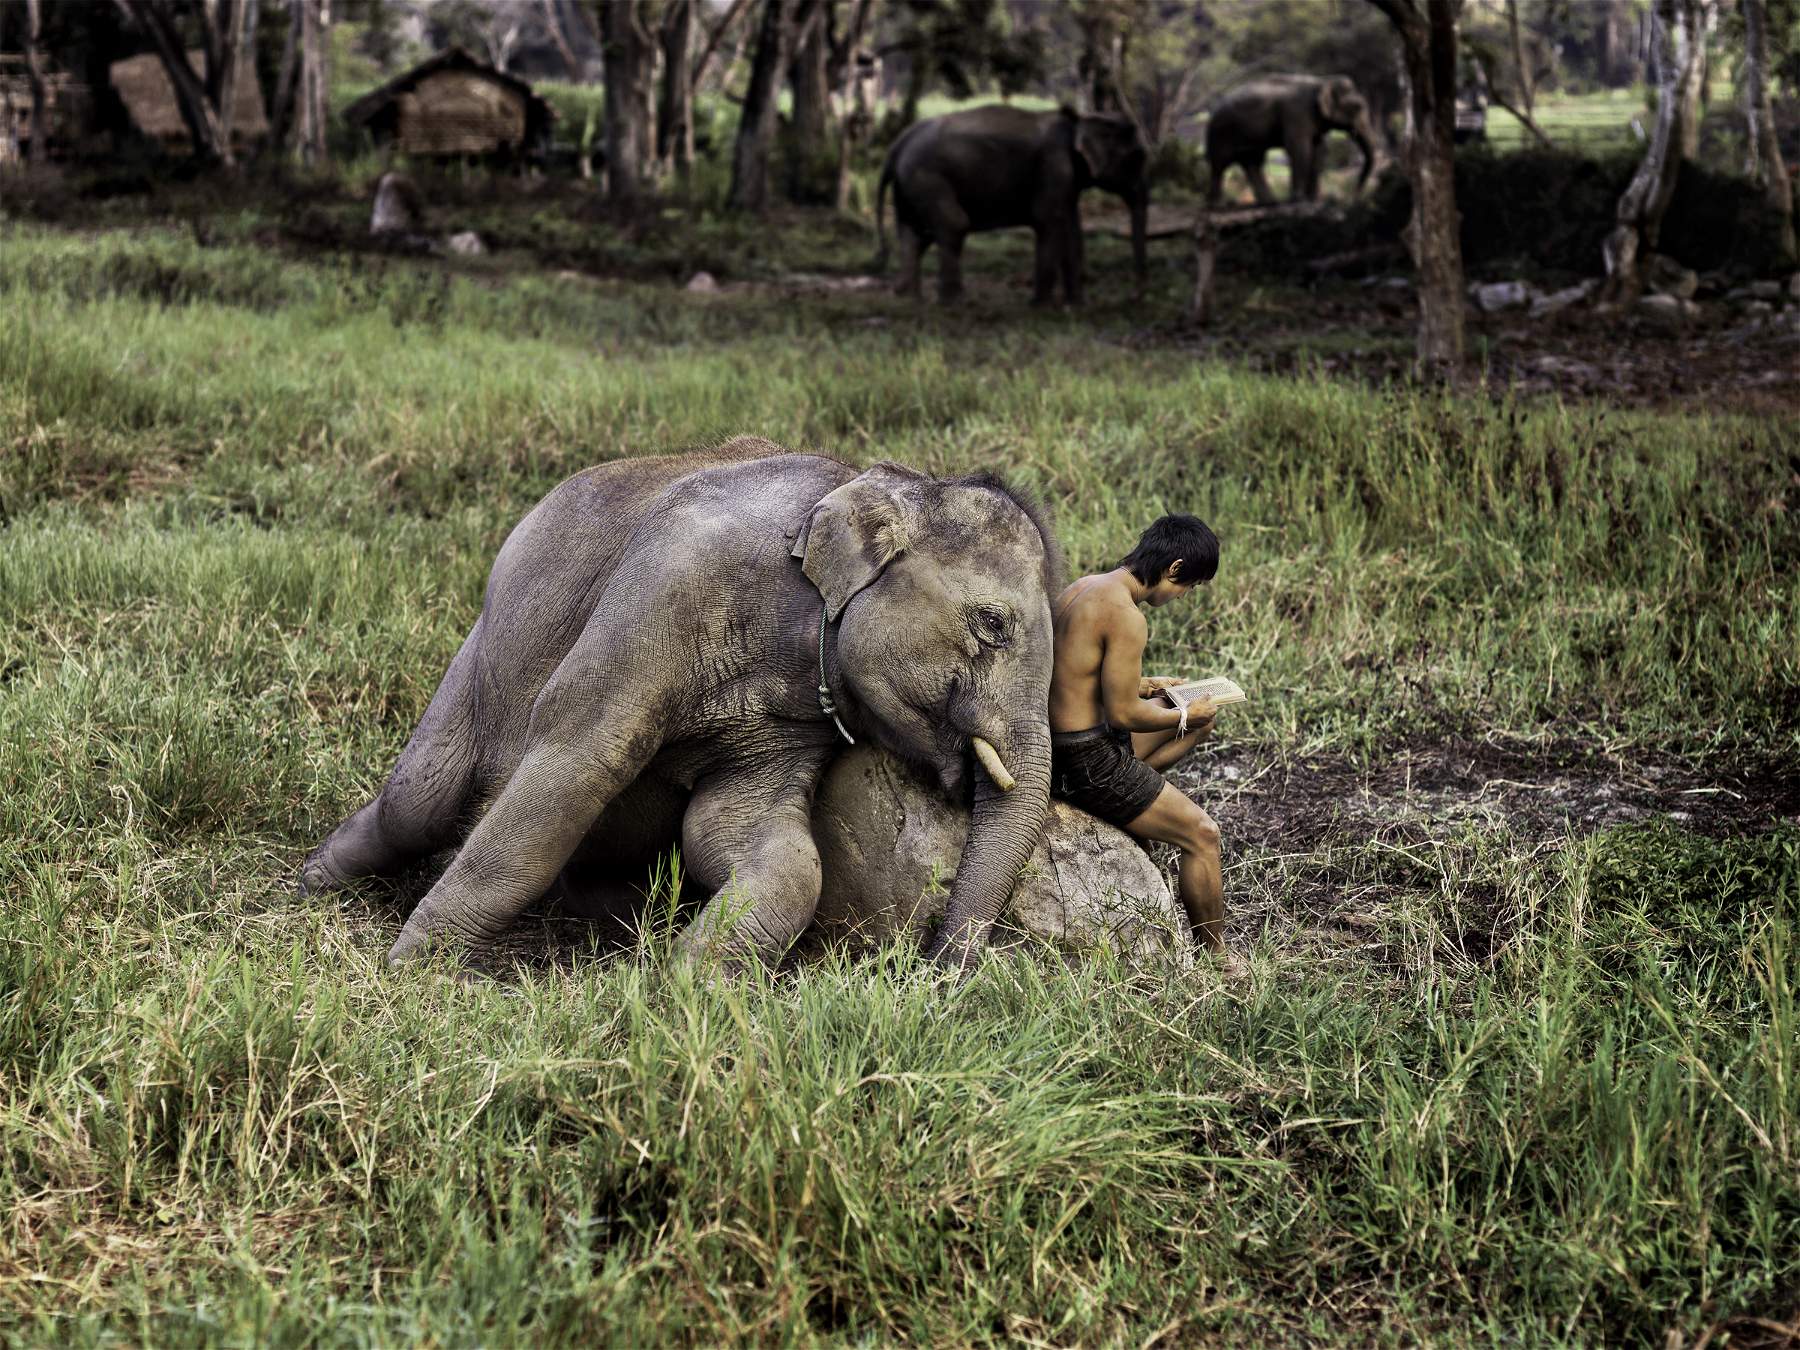 Animals according to Steve McCurry are at MUDEC with the unprecedented exhibition Animals